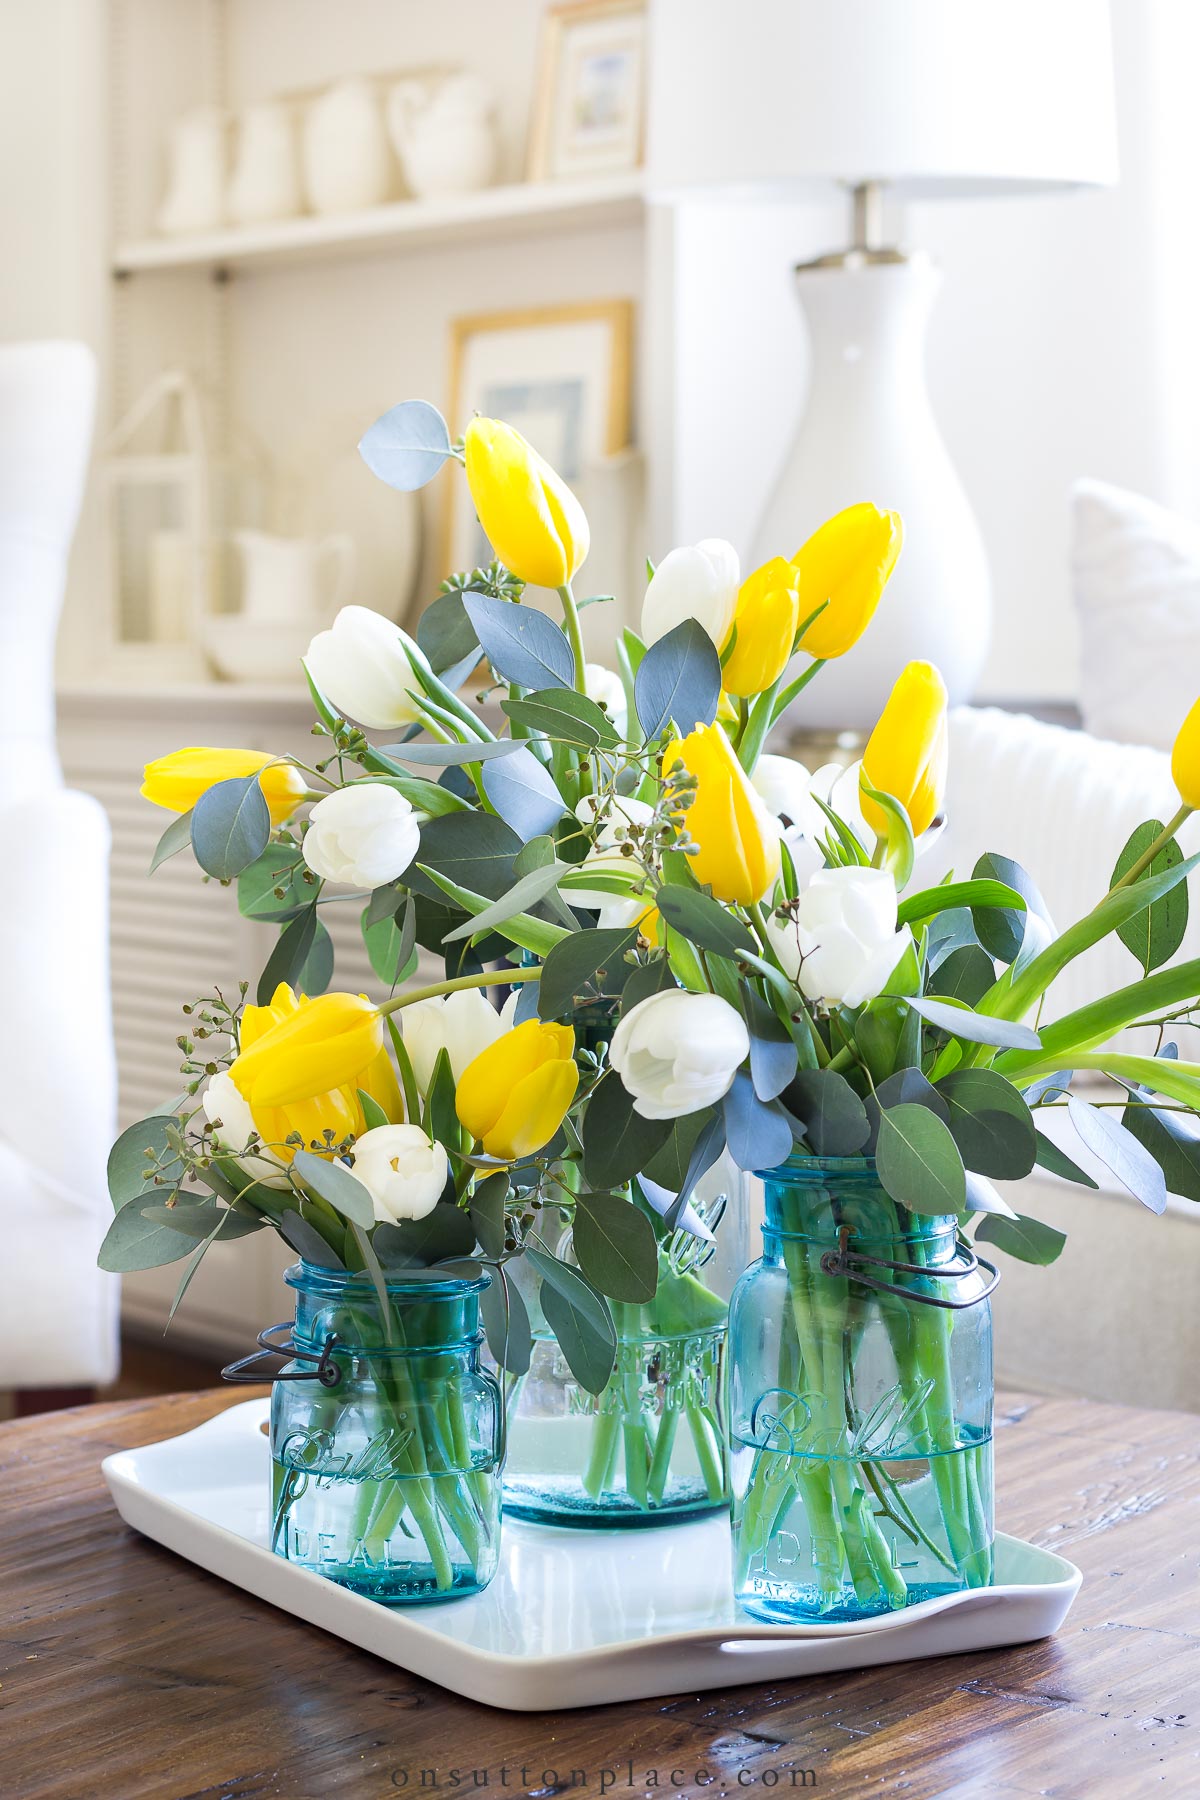 https://www.onsuttonplace.com/wp-content/uploads/2019/02/group-of-mason-jars-on-tray-with-tulips-2022.jpg